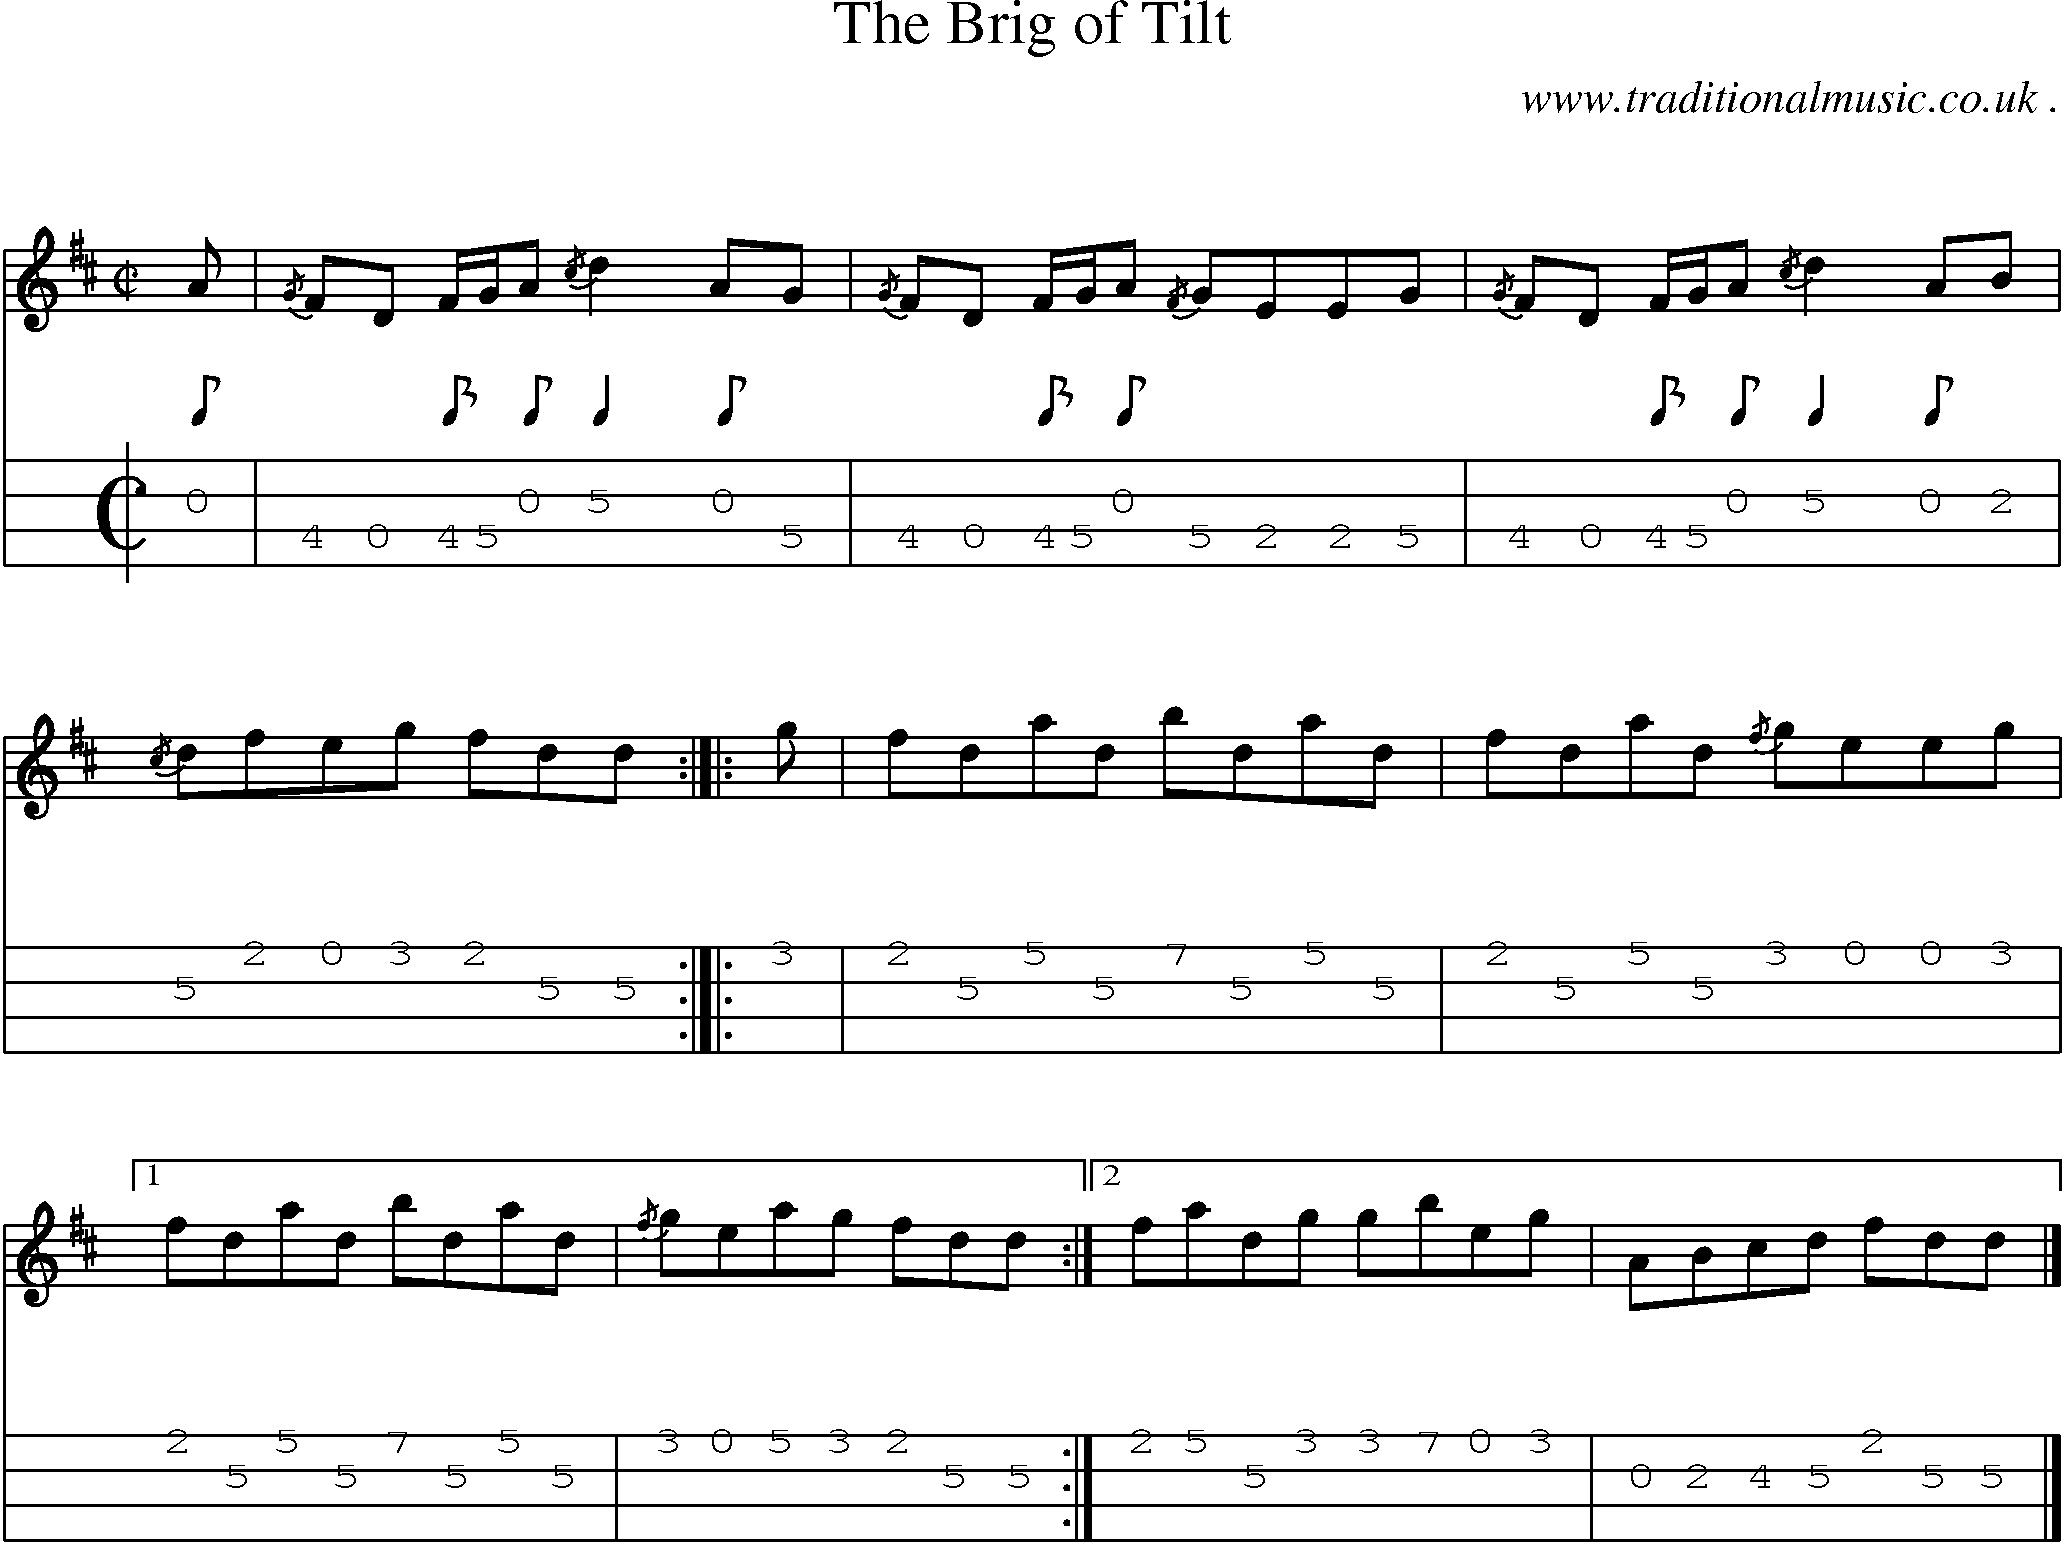 Sheet-music  score, Chords and Mandolin Tabs for The Brig Of Tilt